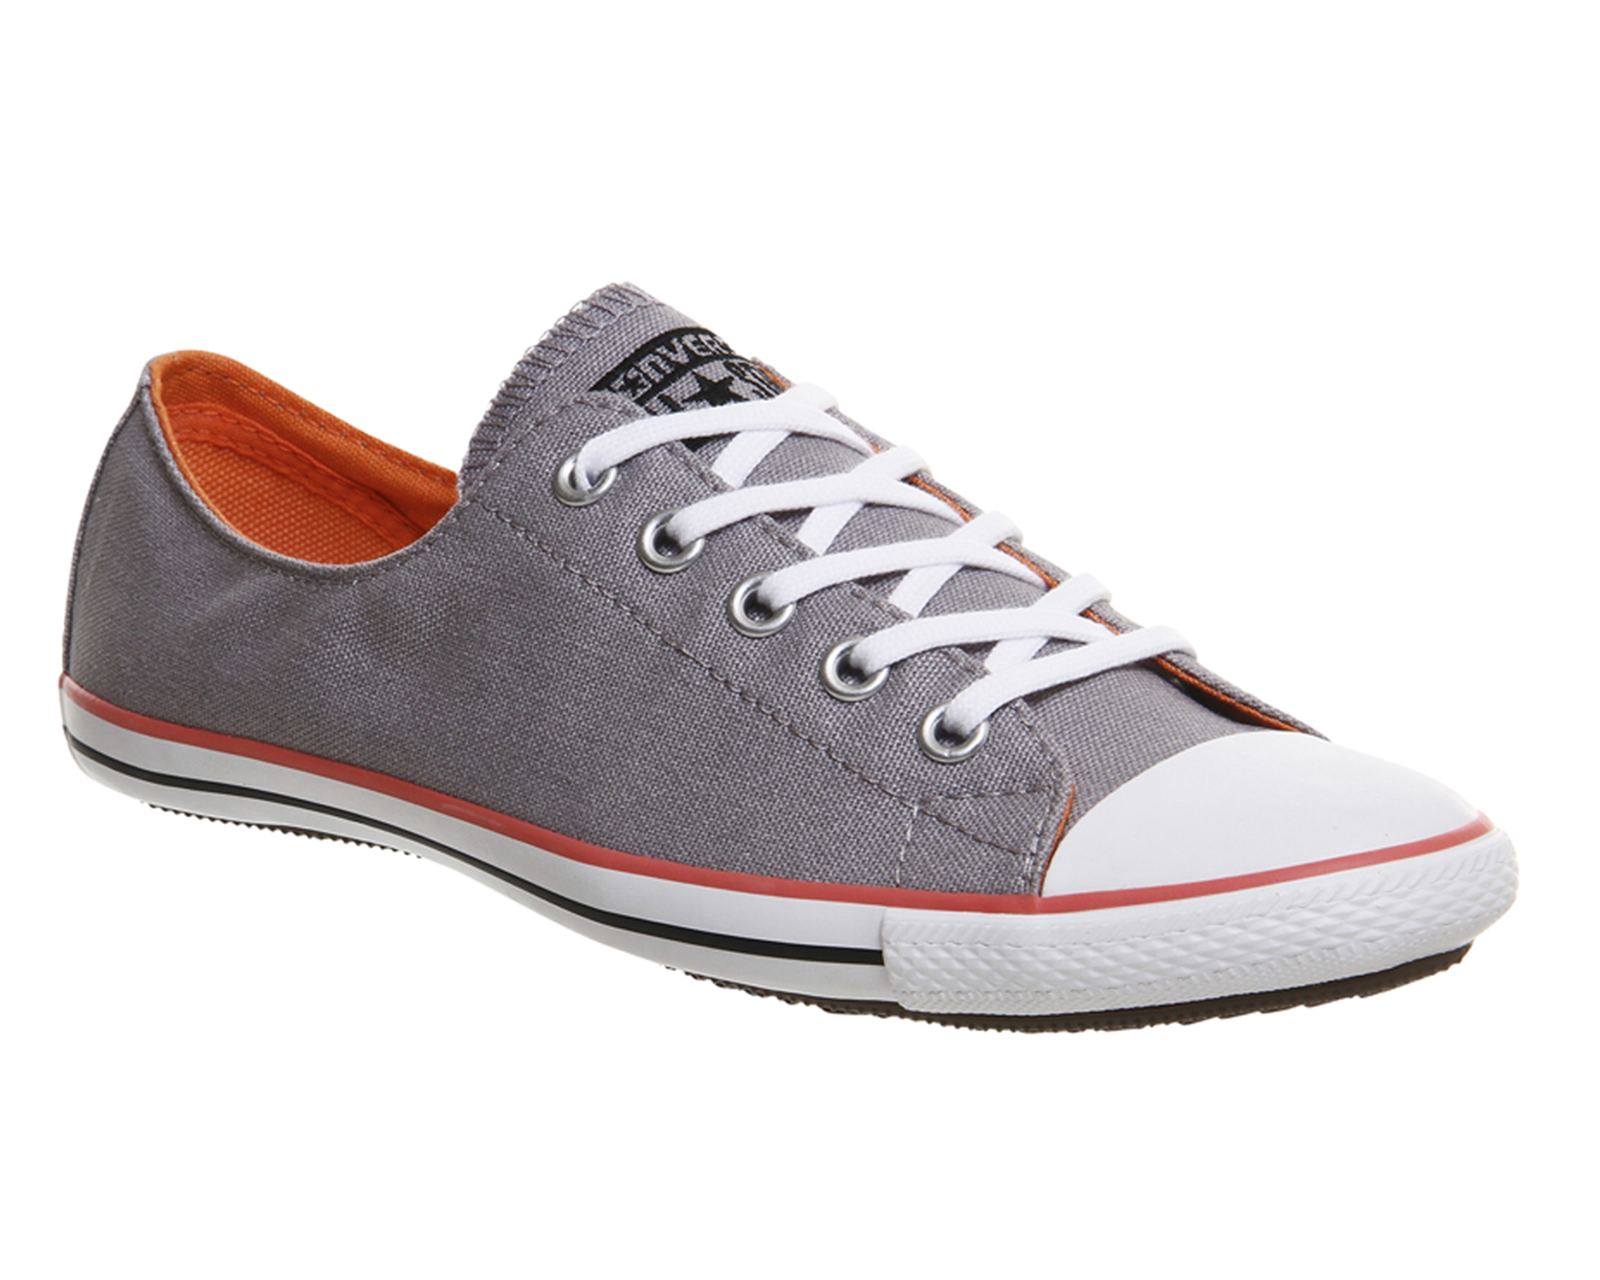 Converse Ct Lite 2 Grey Coral Exclusive - Hers trainers